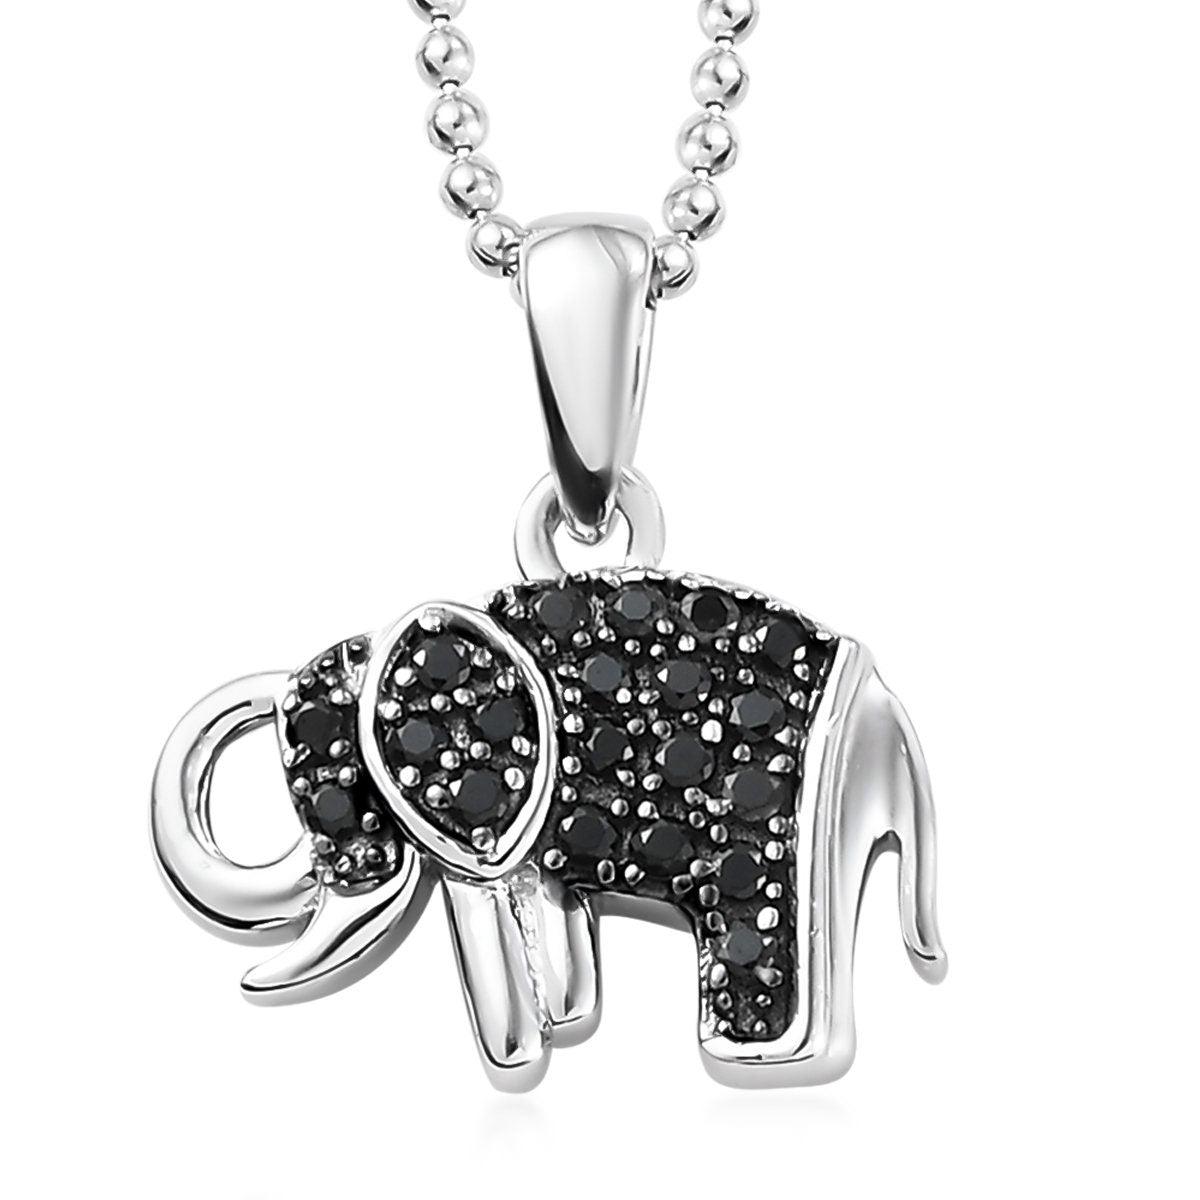 Elephant Pendant, Goodluck Charm Pendant in Platinum Plated 925 Sterling Silver, Meaningful Jewellery , - Inspiring Jewellery